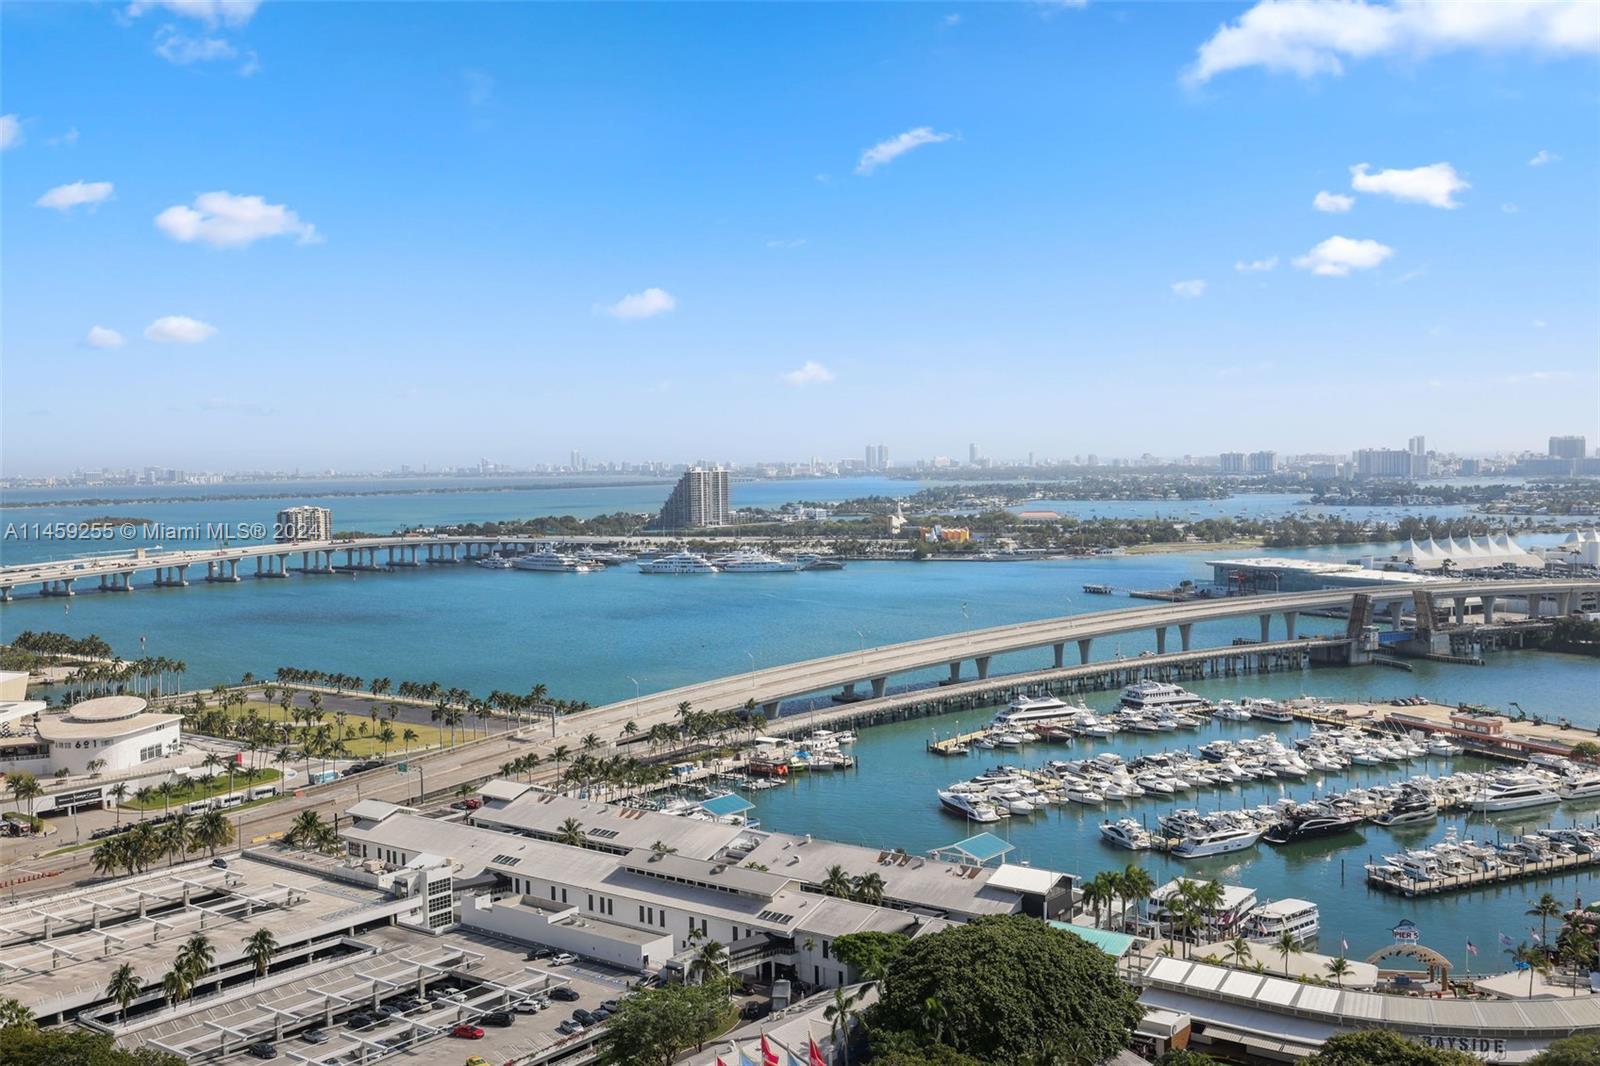 SPACIOUS 2 BEDROOM LAYOUT WITH STUNNING VIEWS OF BISCAYNE BAY AND DOWNTOWN MIAMI. CORNER UNIT WITH A